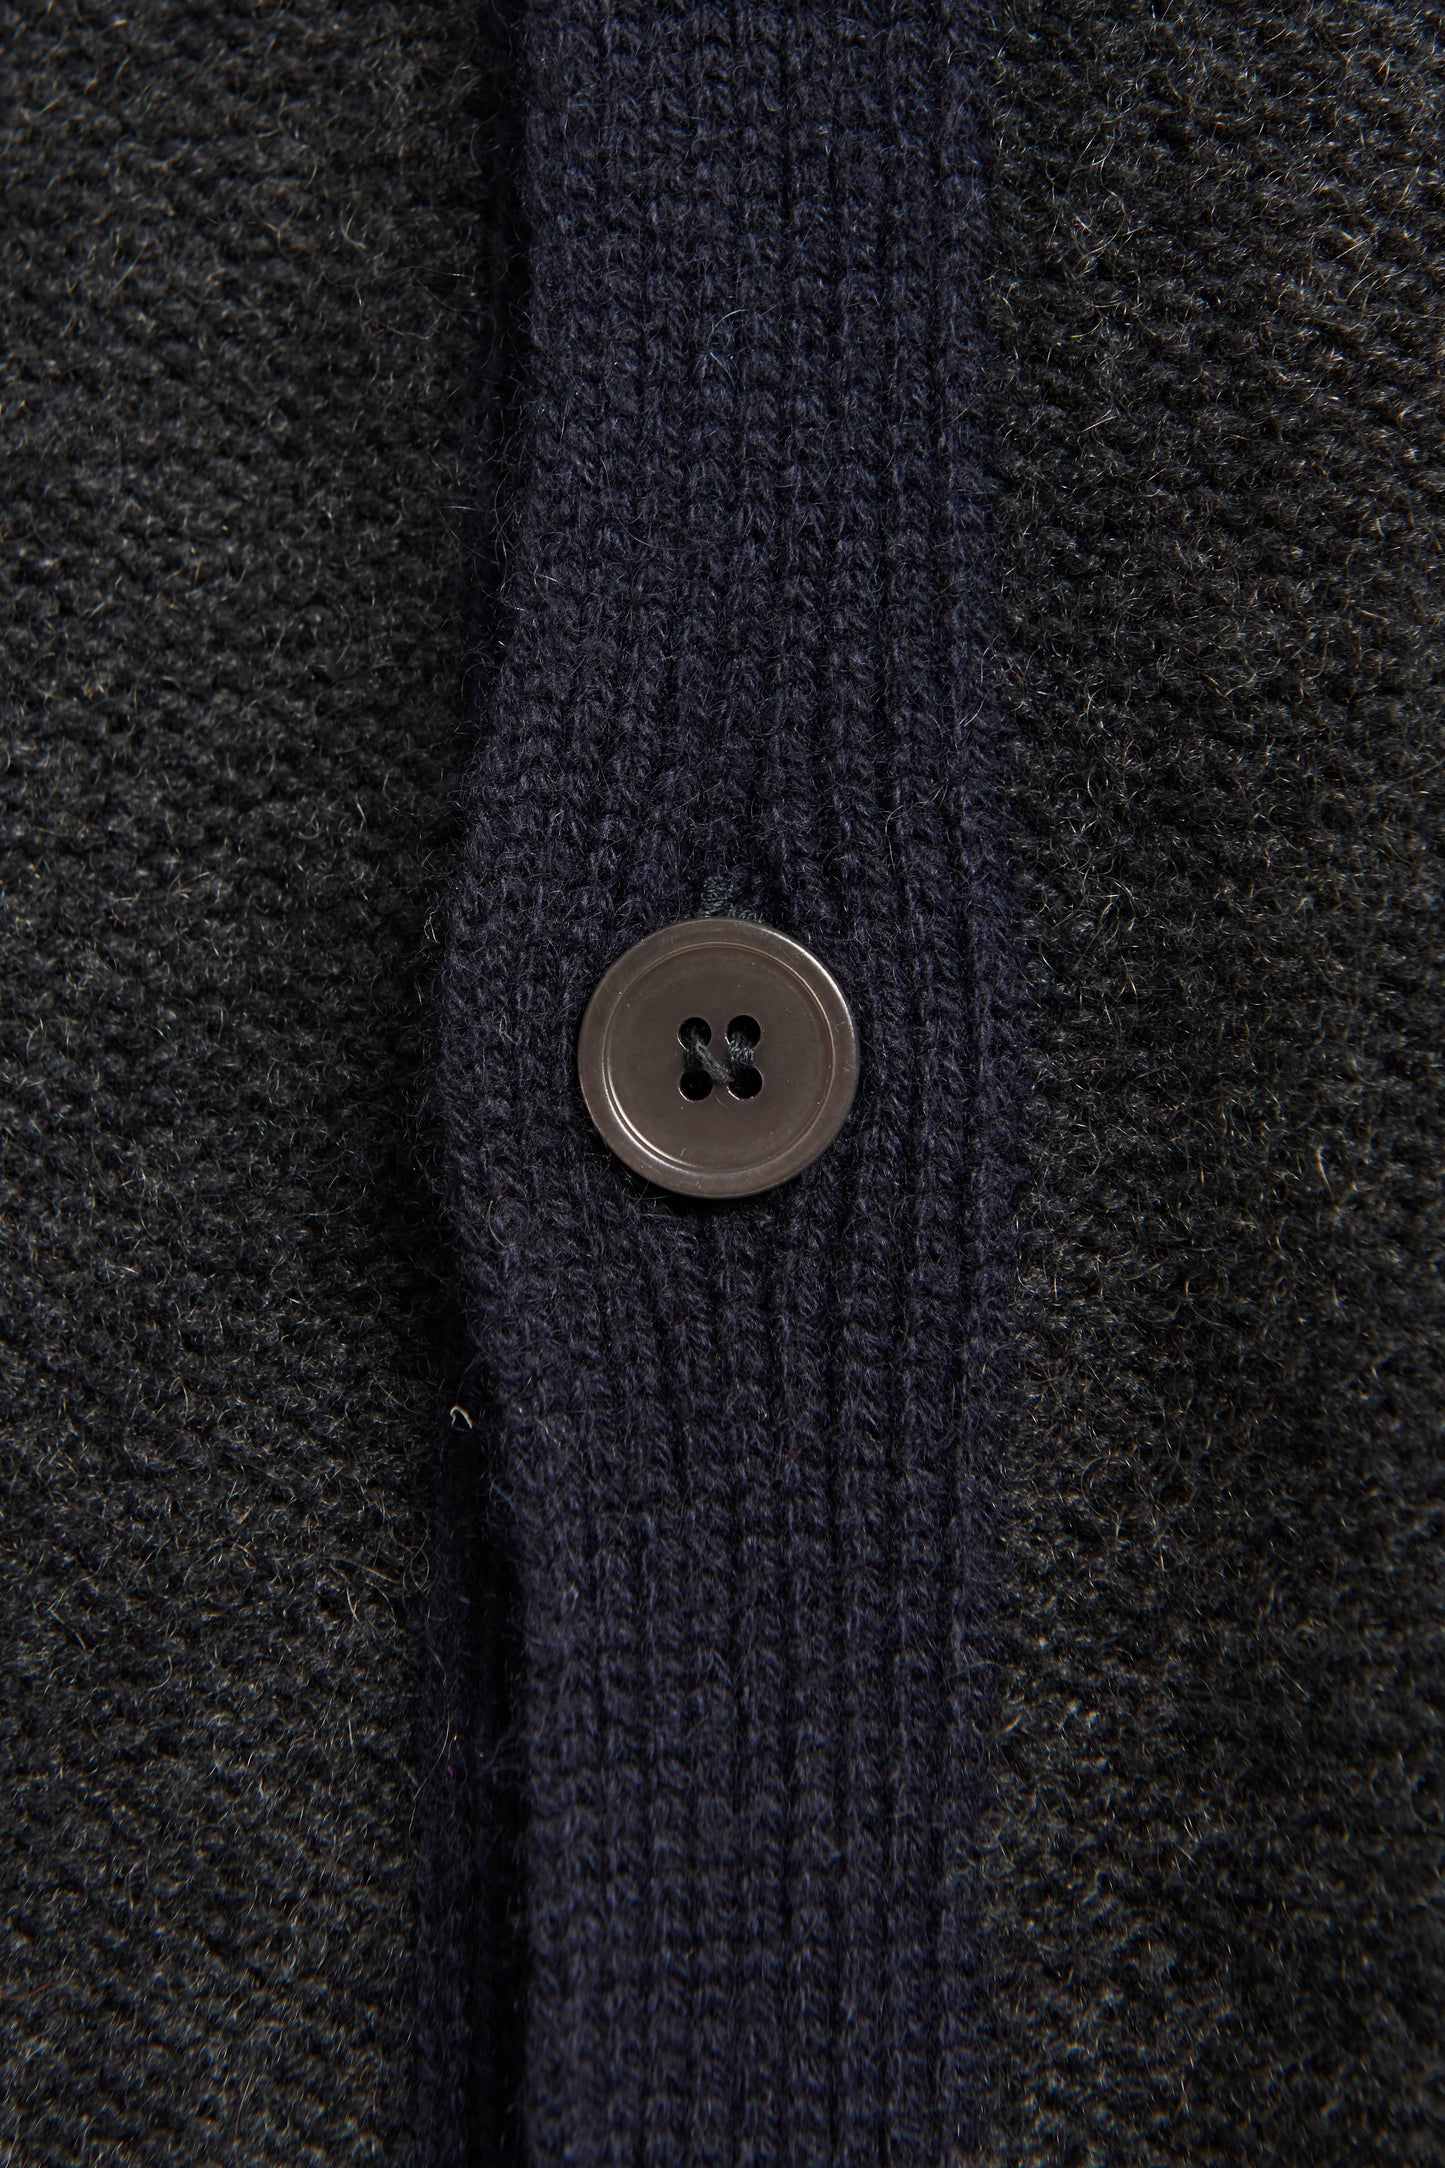 Grey and Navy Cashmere Preowned Cardigan